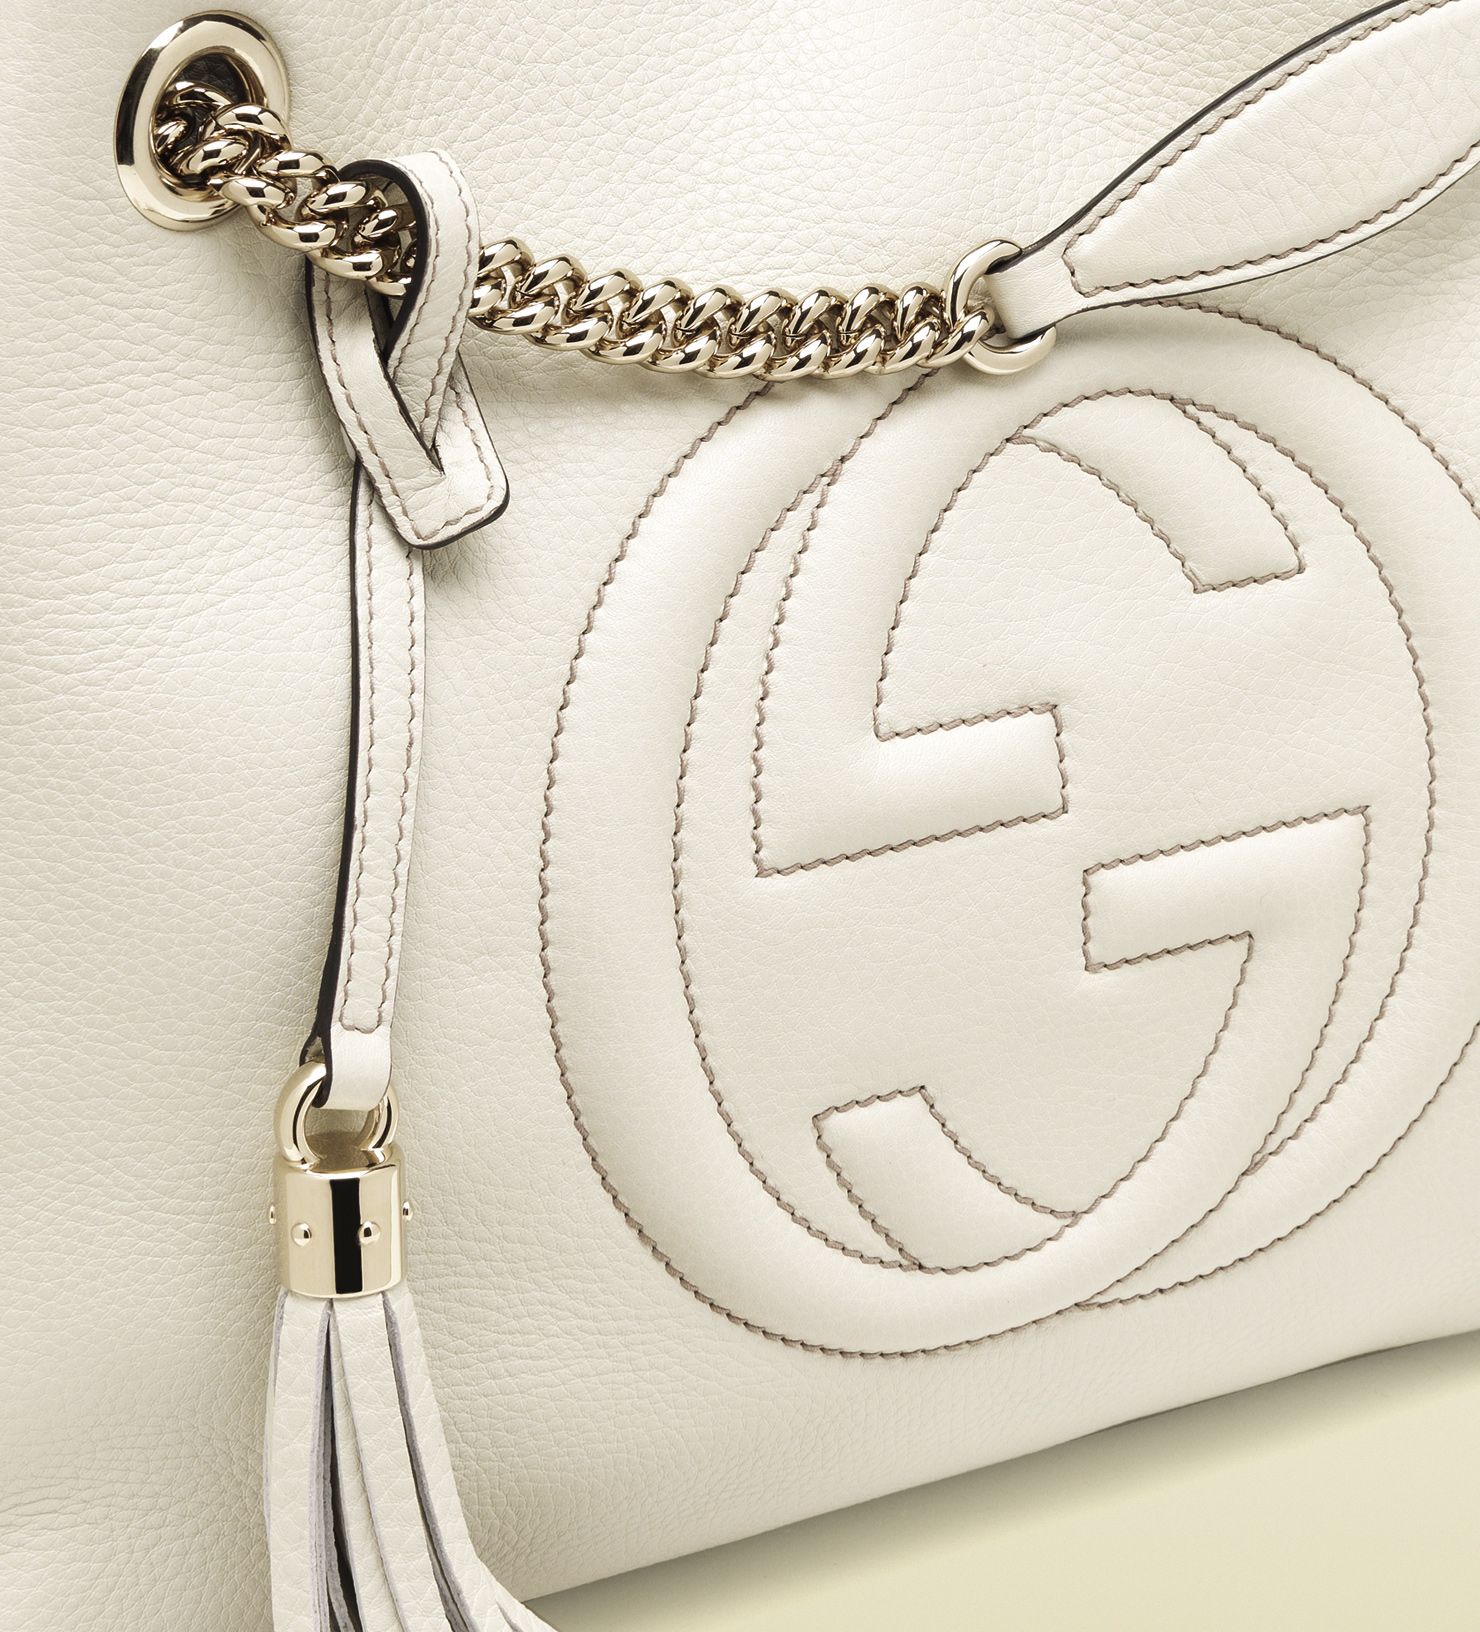 Gucci Soho Leather Shoulder Bag in White | Lyst